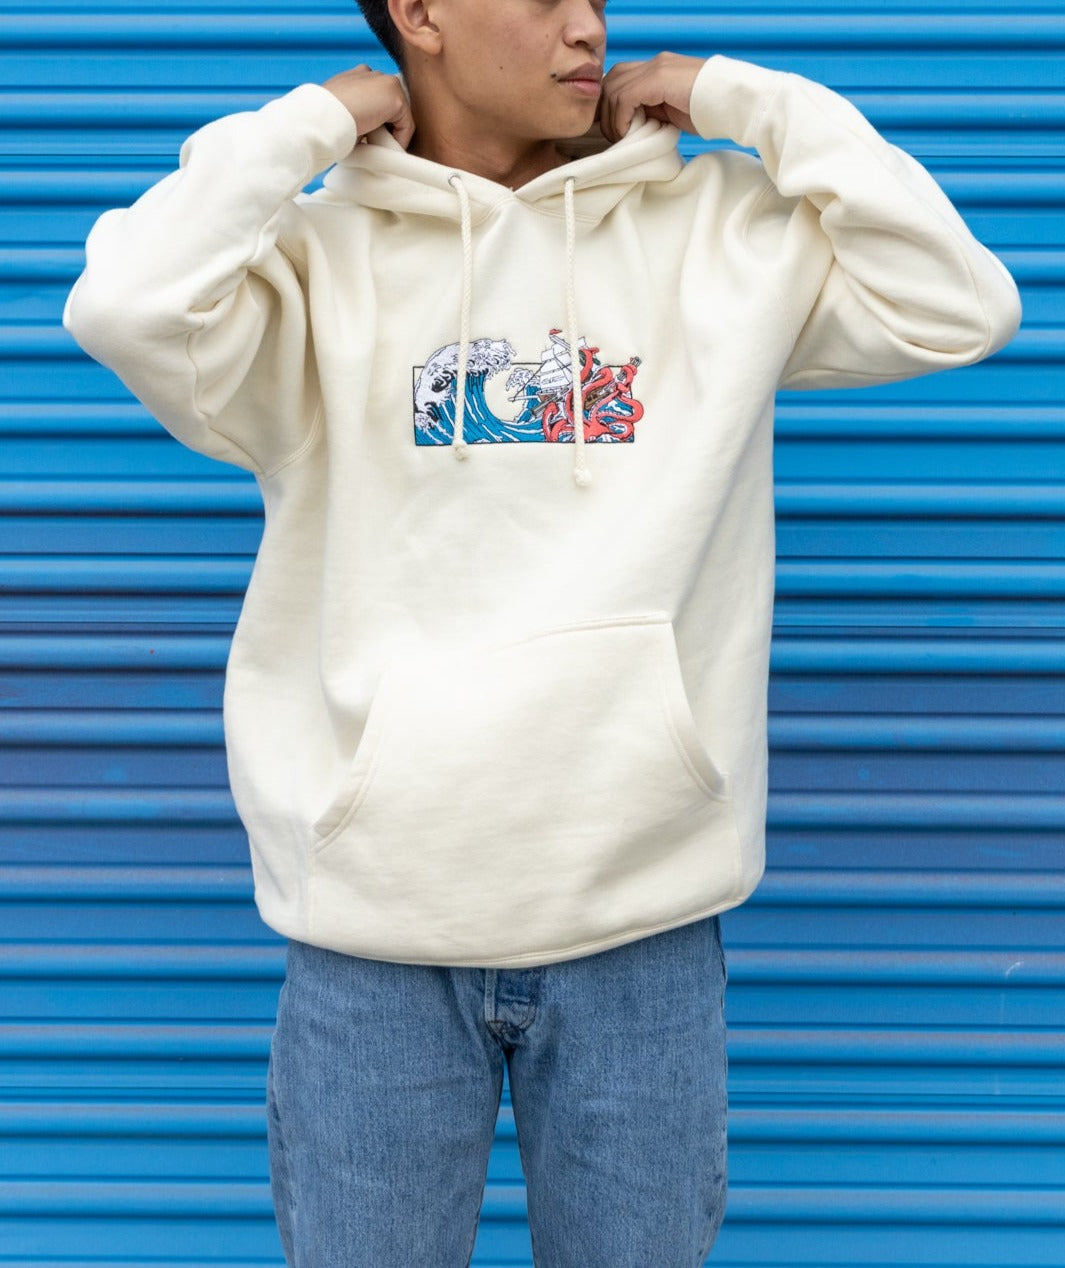 Man wearing a cream Squid Industries x Simple Stock Hoodie posing against a blue background outside